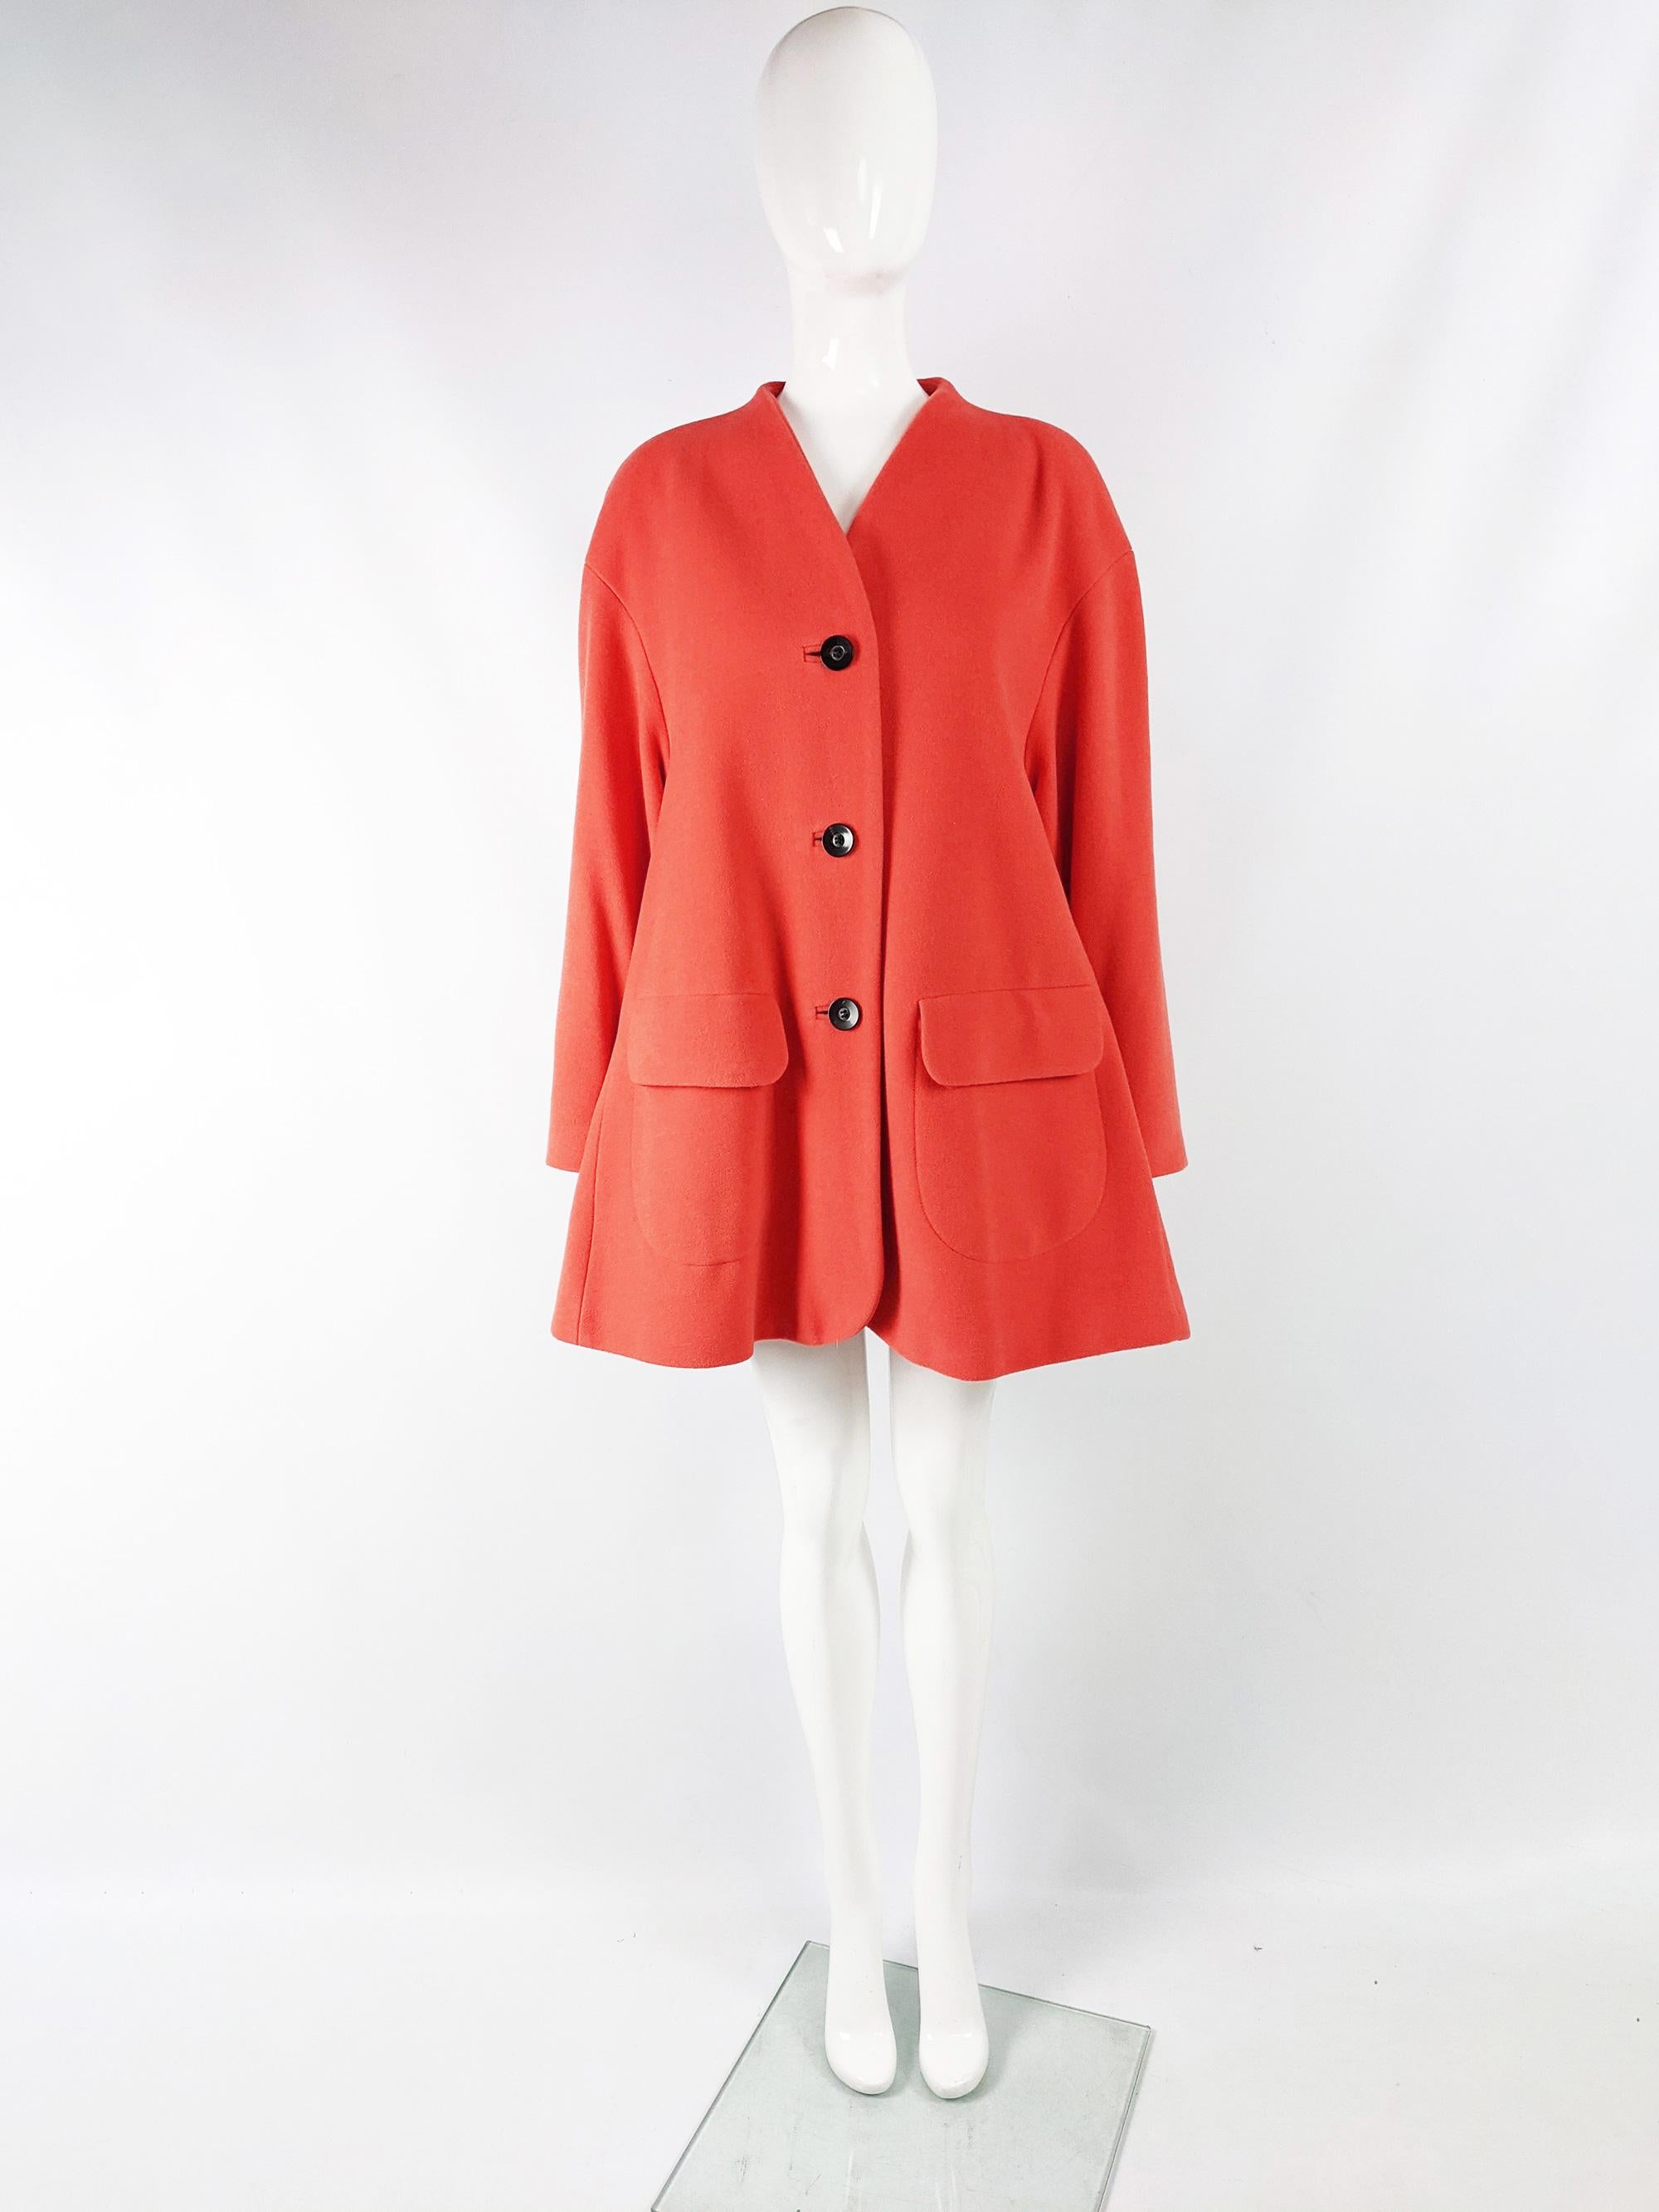 An incredible vintage womens swing coat from the 80s by designer fashion house, Escada. Made from a luxurious virgin wool, cashmere and angora blend orangish coral fabric. It has an amazing trapeze style silhouette that flares out further towards